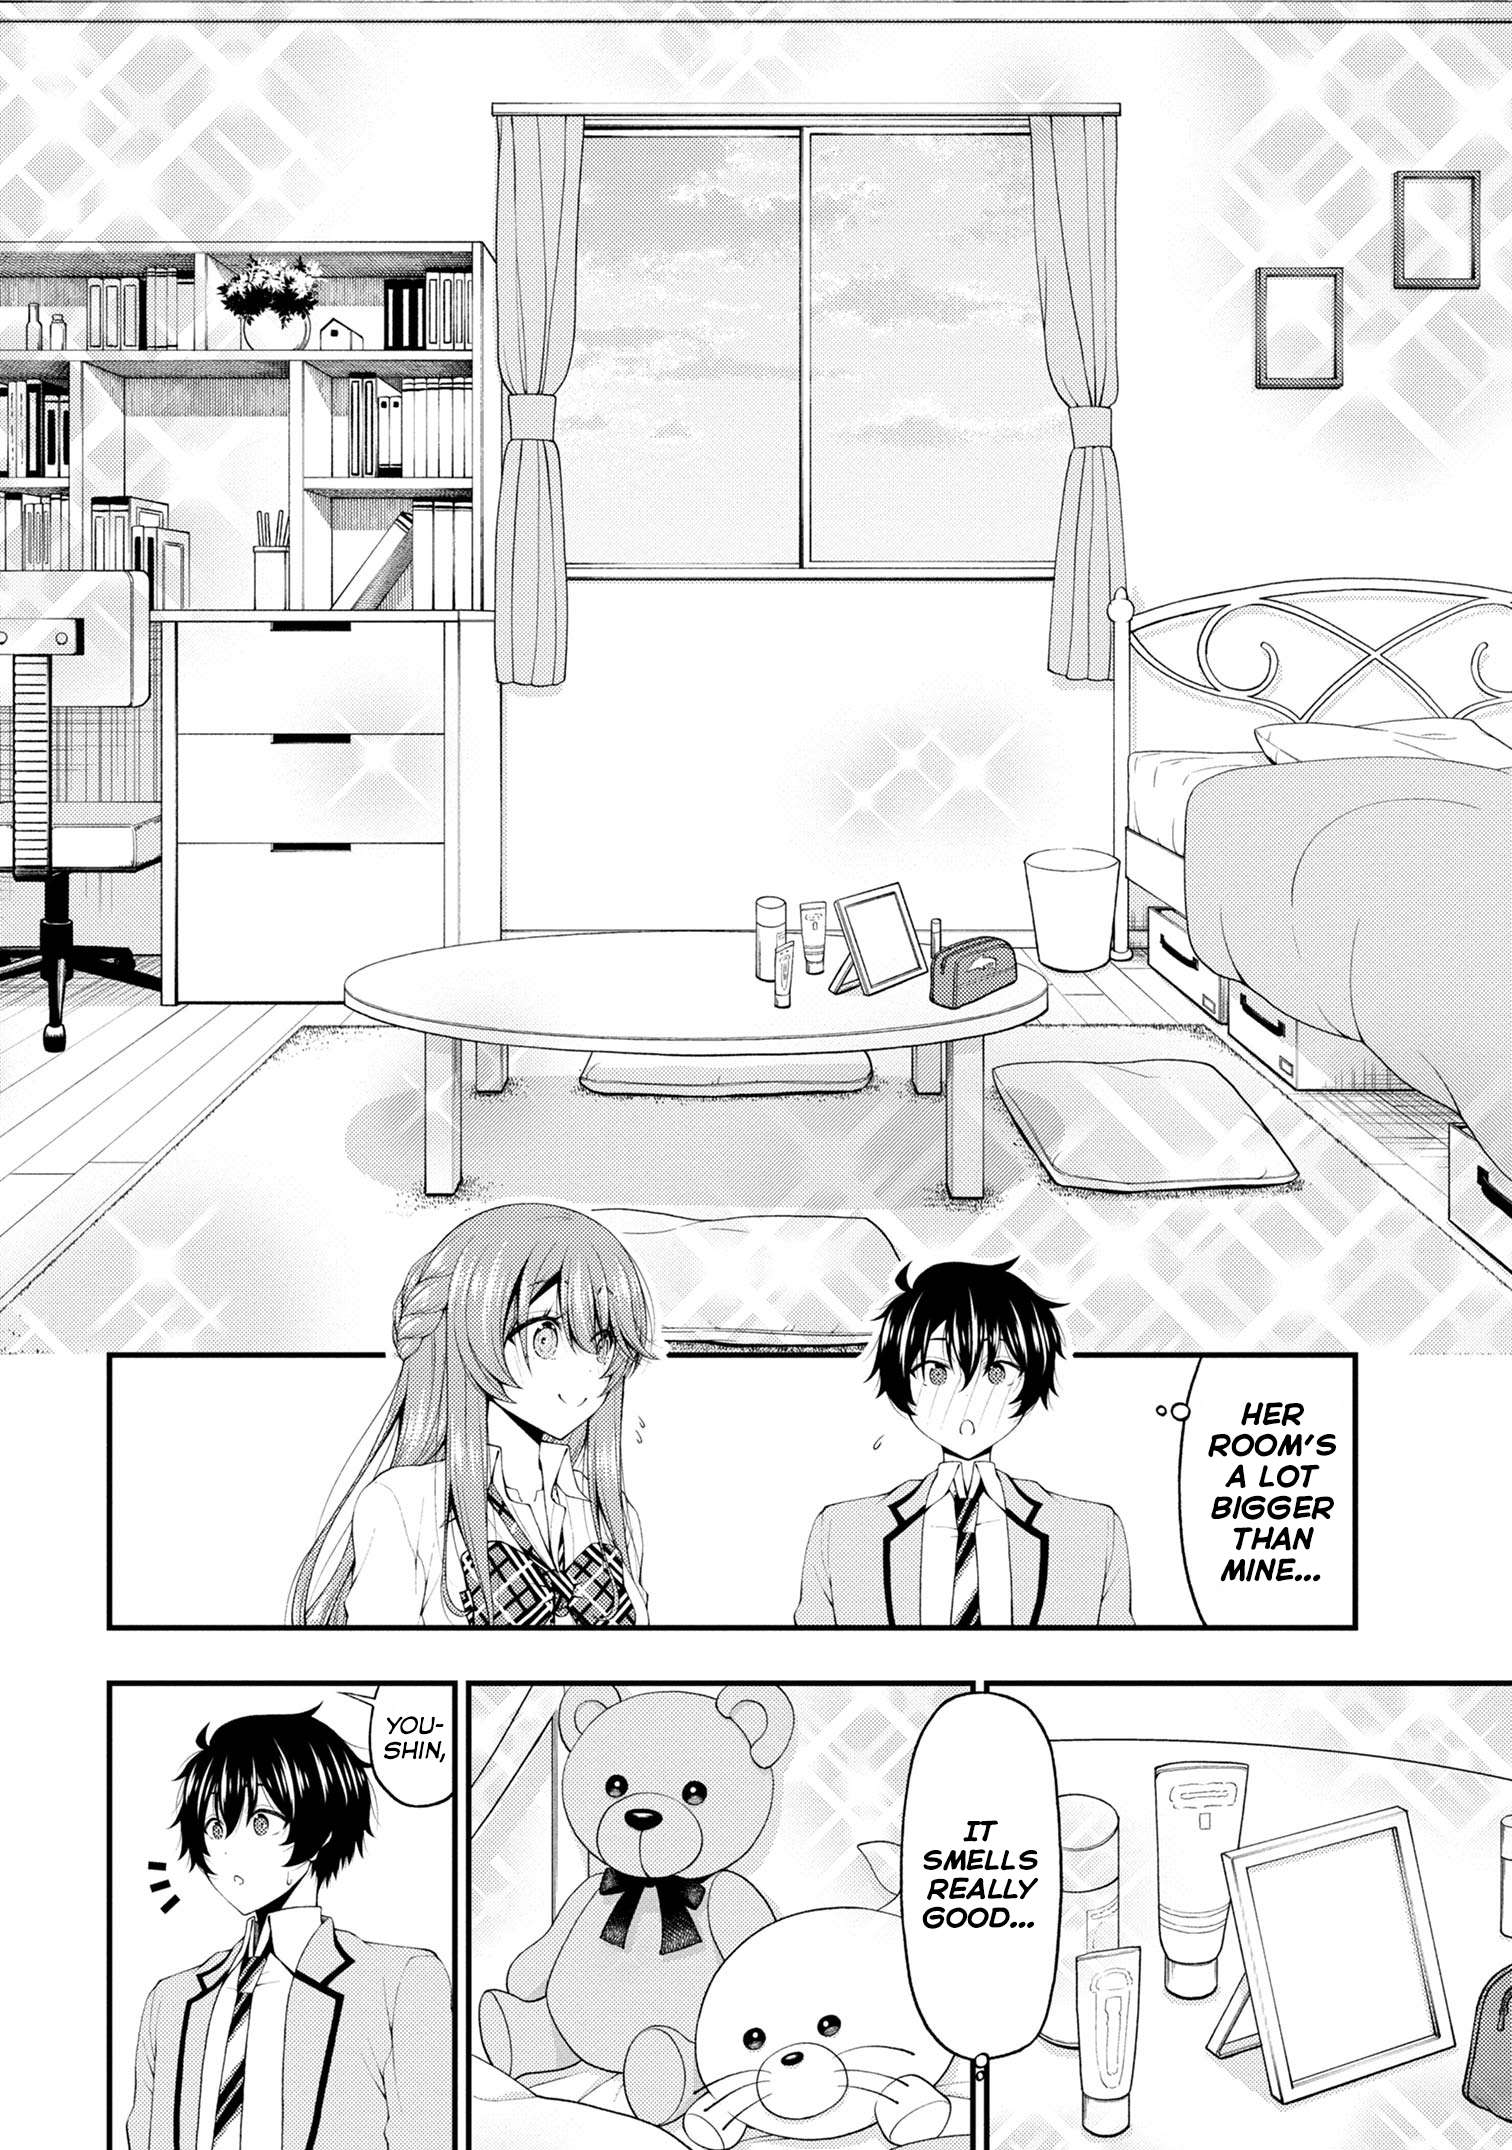 The Gal Who Was Meant to Confess to Me as a Game Punishment - chapter 17 - #2